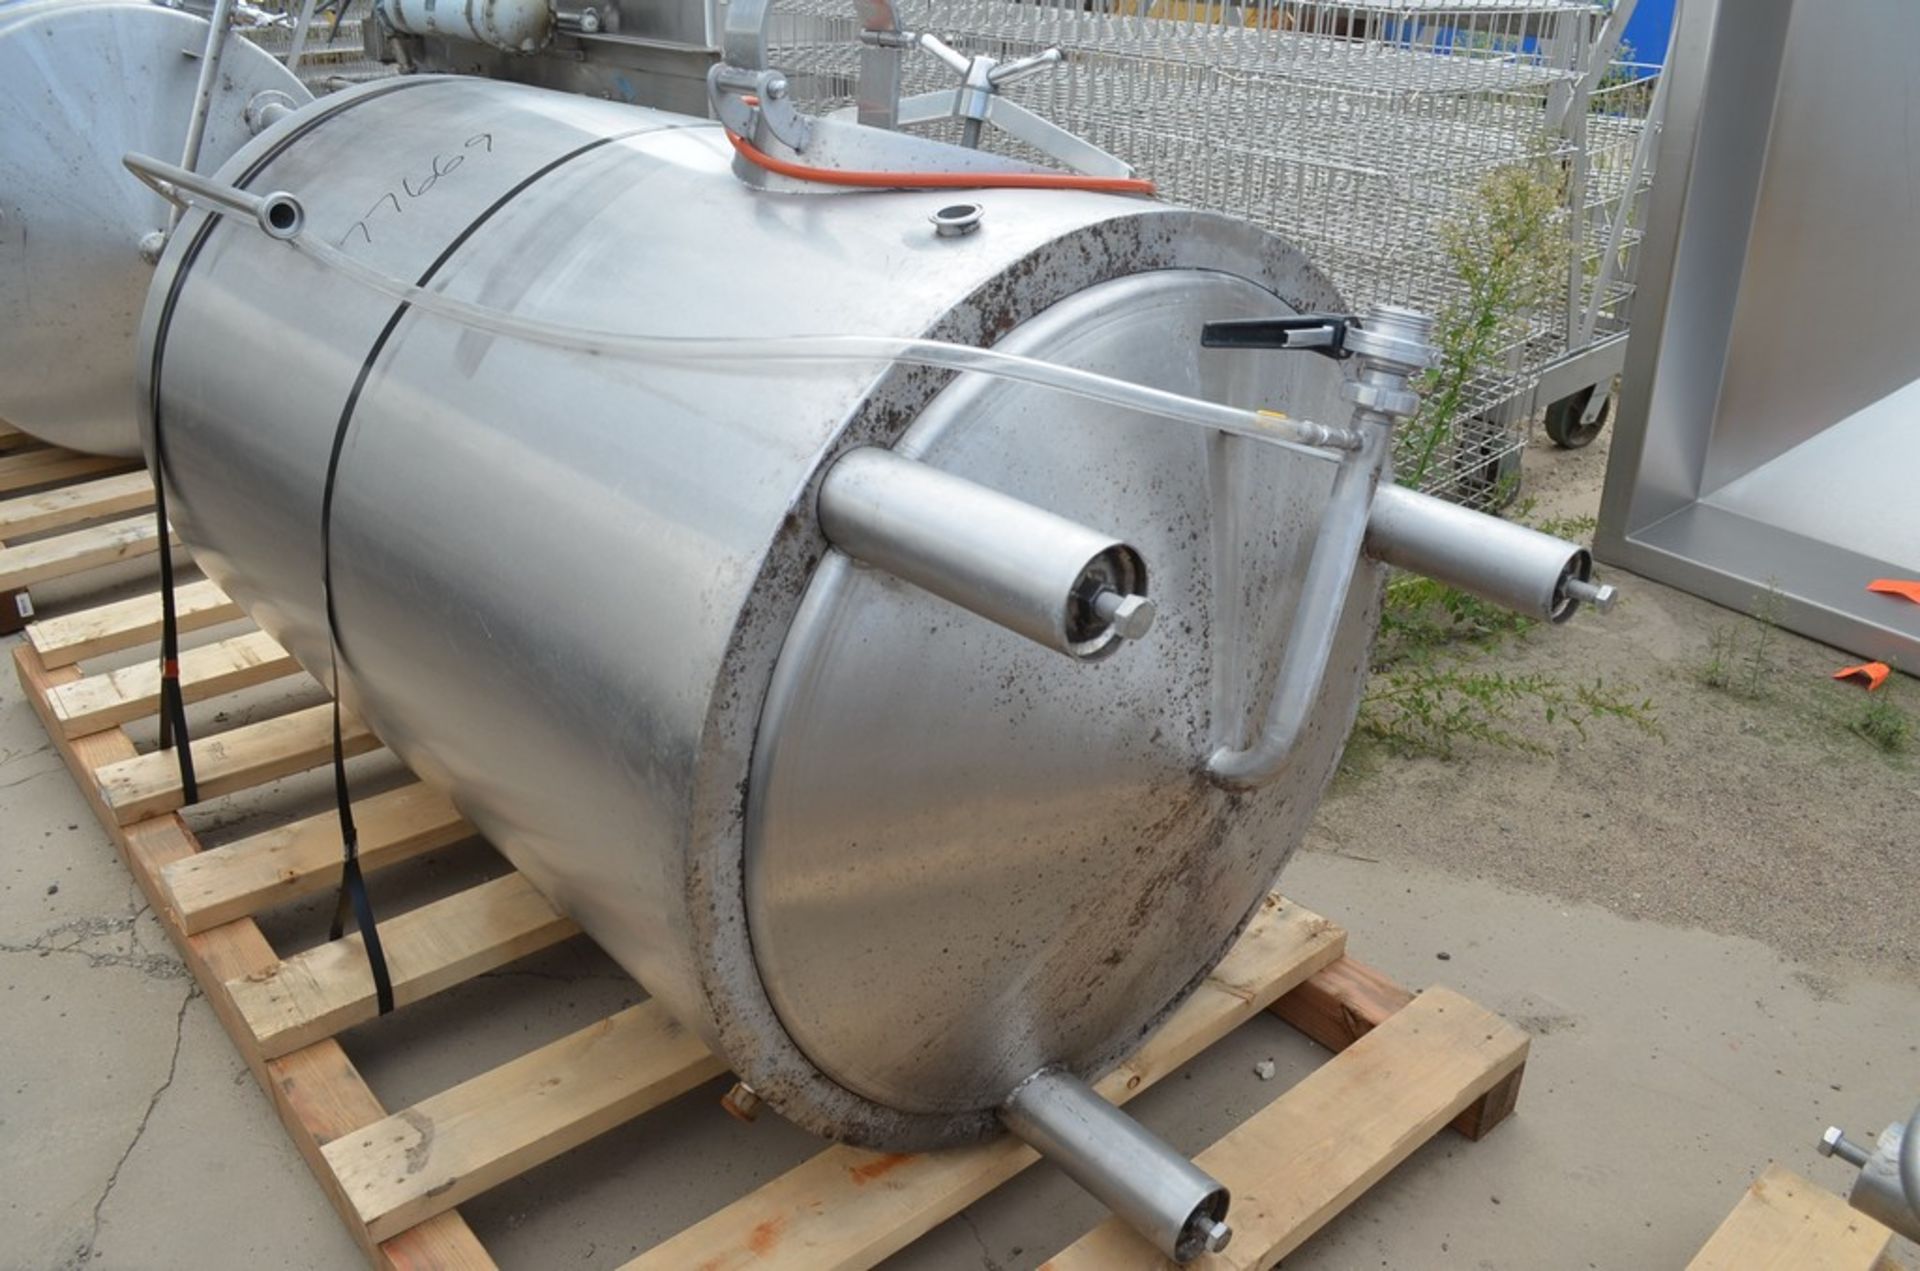 8.5 BBL (1,000 Liter/265 Gallons) Cote Manufacturing Vertical S/S Jacketed Brite Tank. Dome Top, - Image 3 of 11